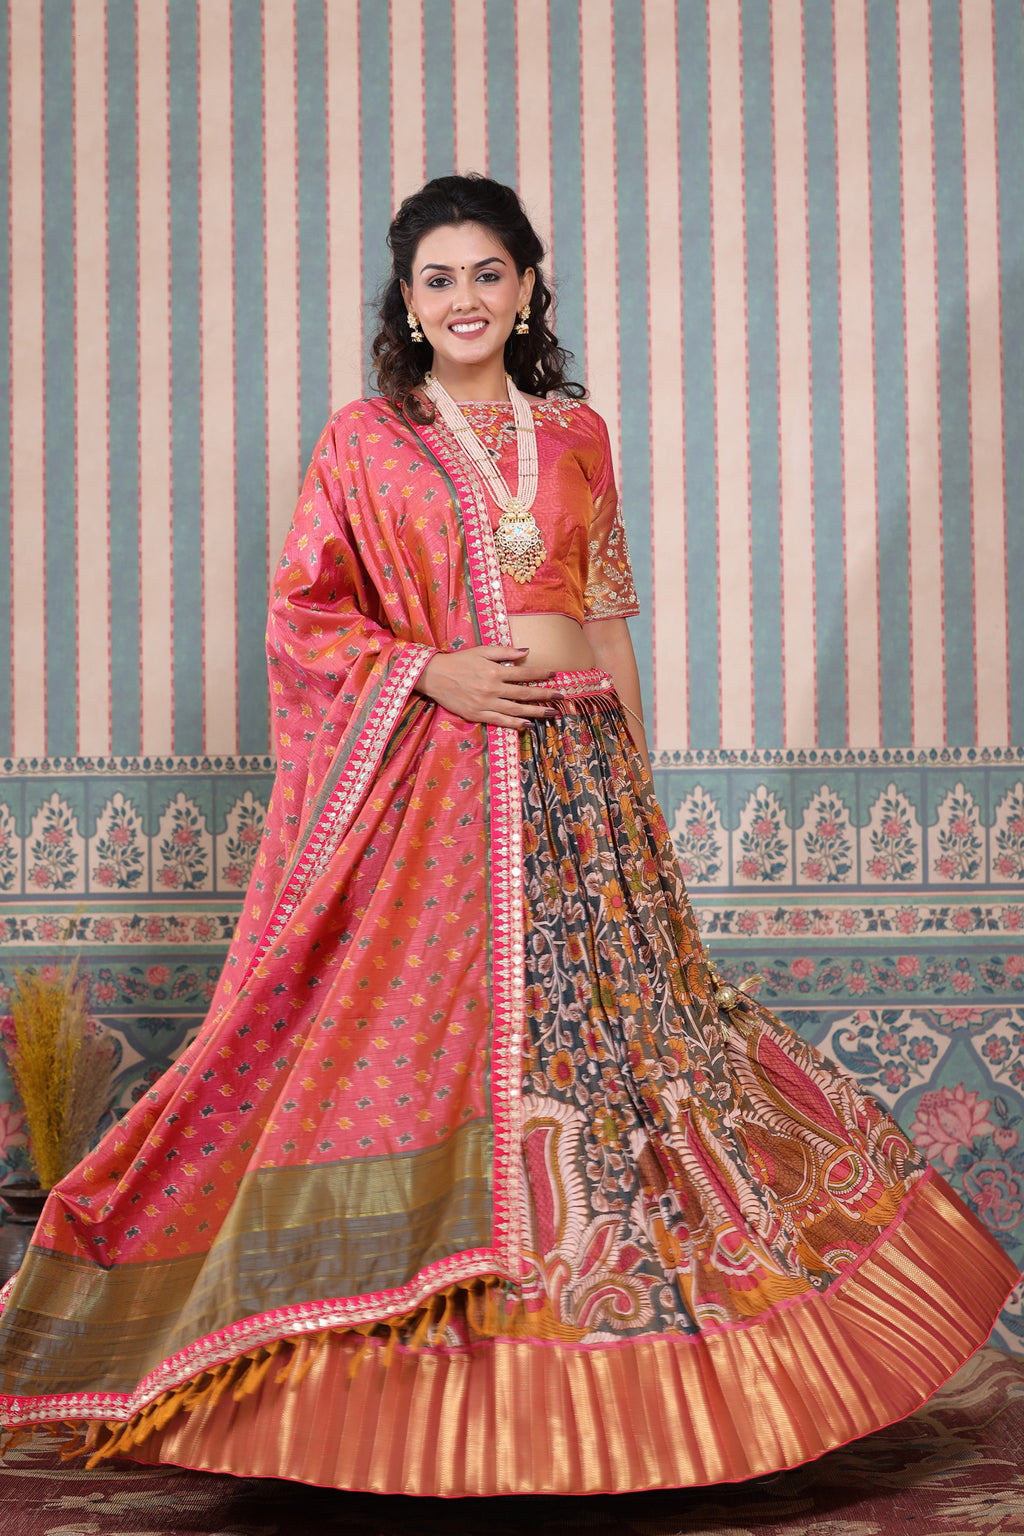 Shop a pink floral printed lehenga set featuring gota patti work and a silk dupatta set. It comes with a beautiful pink blouse embroidered with gota patti work. Pair it with beautiful jewelry to enhance your look. Shop online from Pure Elegance.